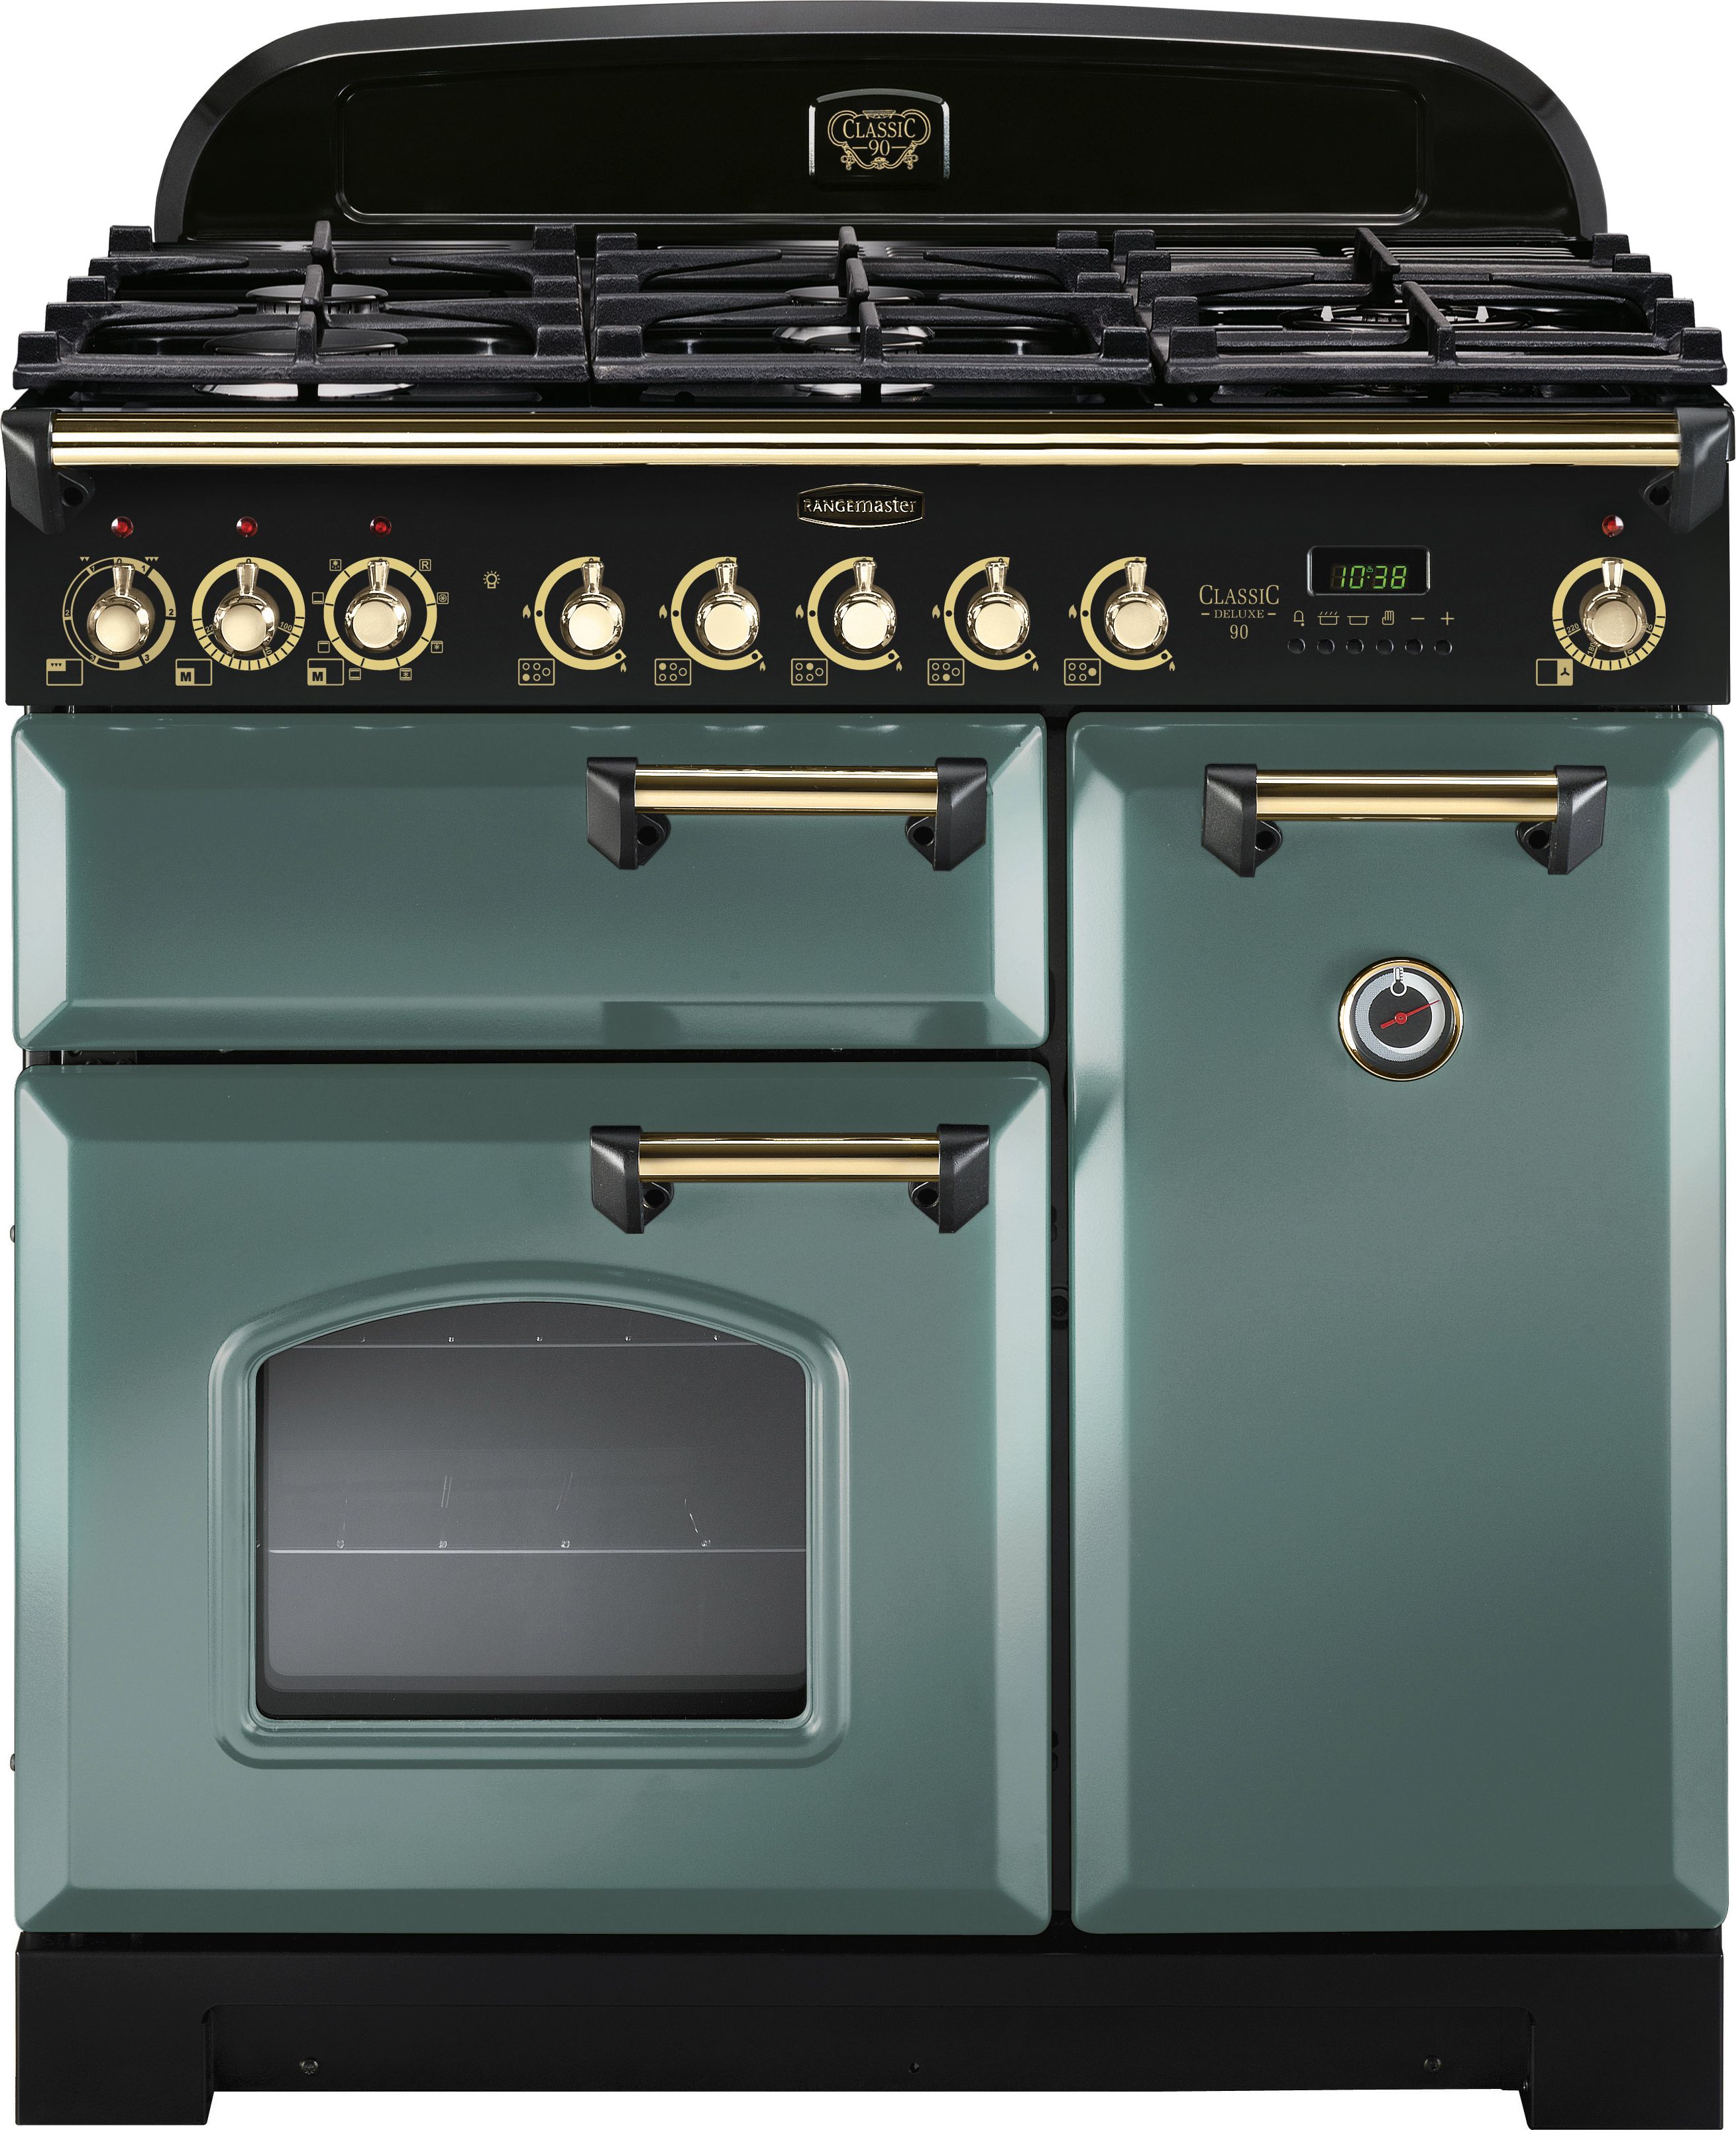 Rangemaster Classic Deluxe CDL90DFFMG/B 90cm Dual Fuel Range Cooker - Mineral Green / Brass - A/A Rated, Green